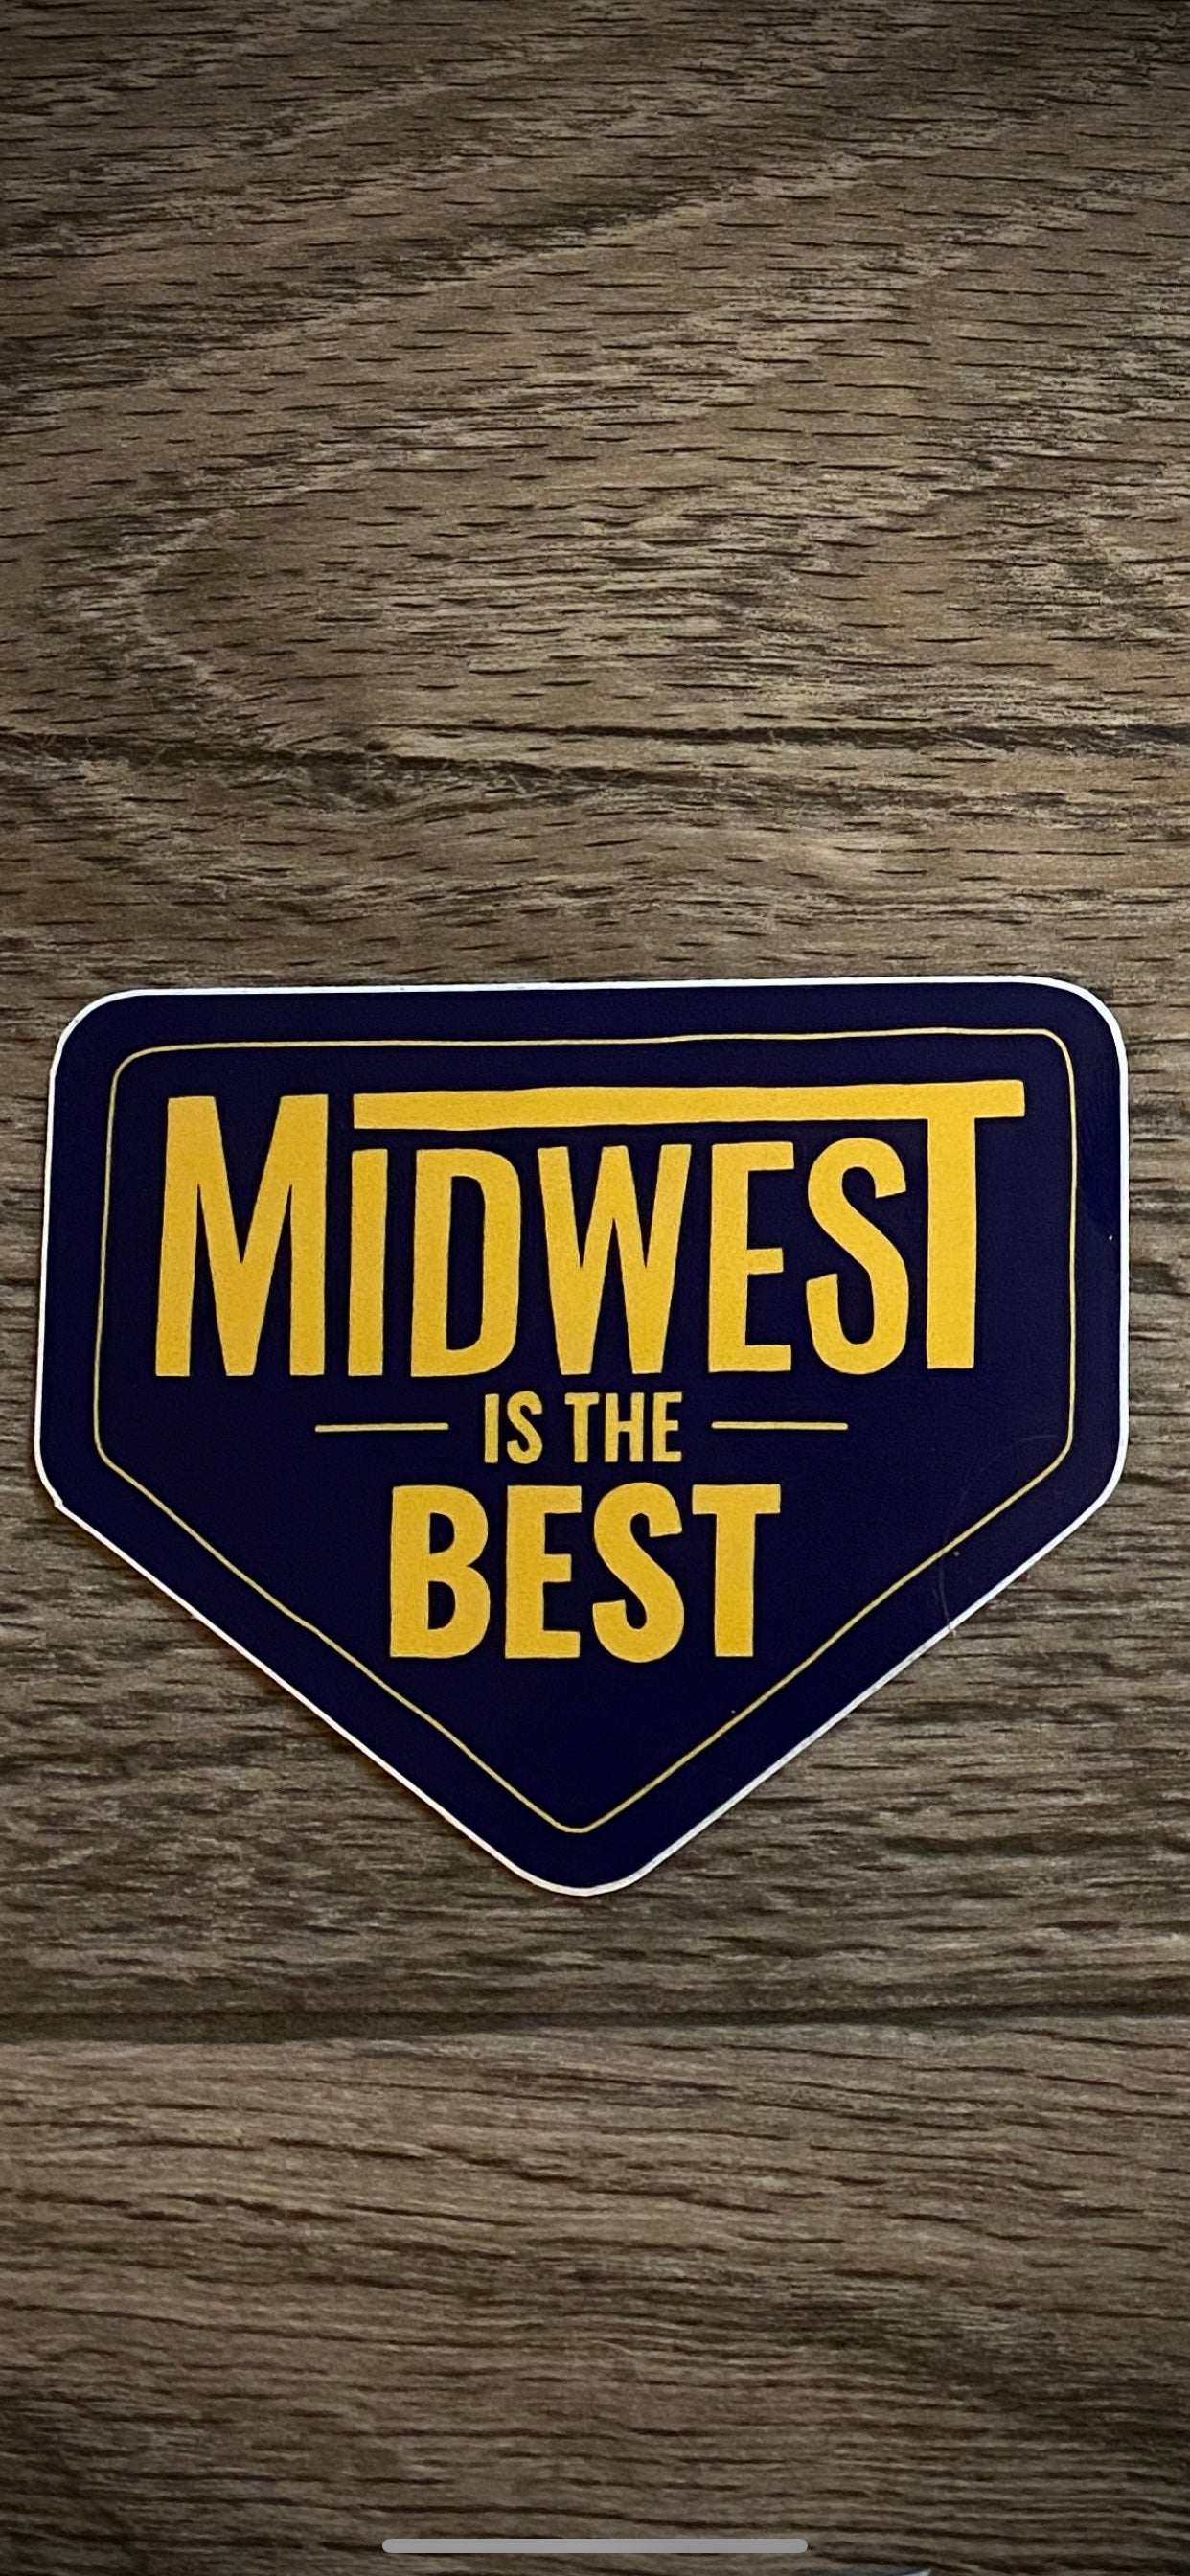 midwest is the best sticker